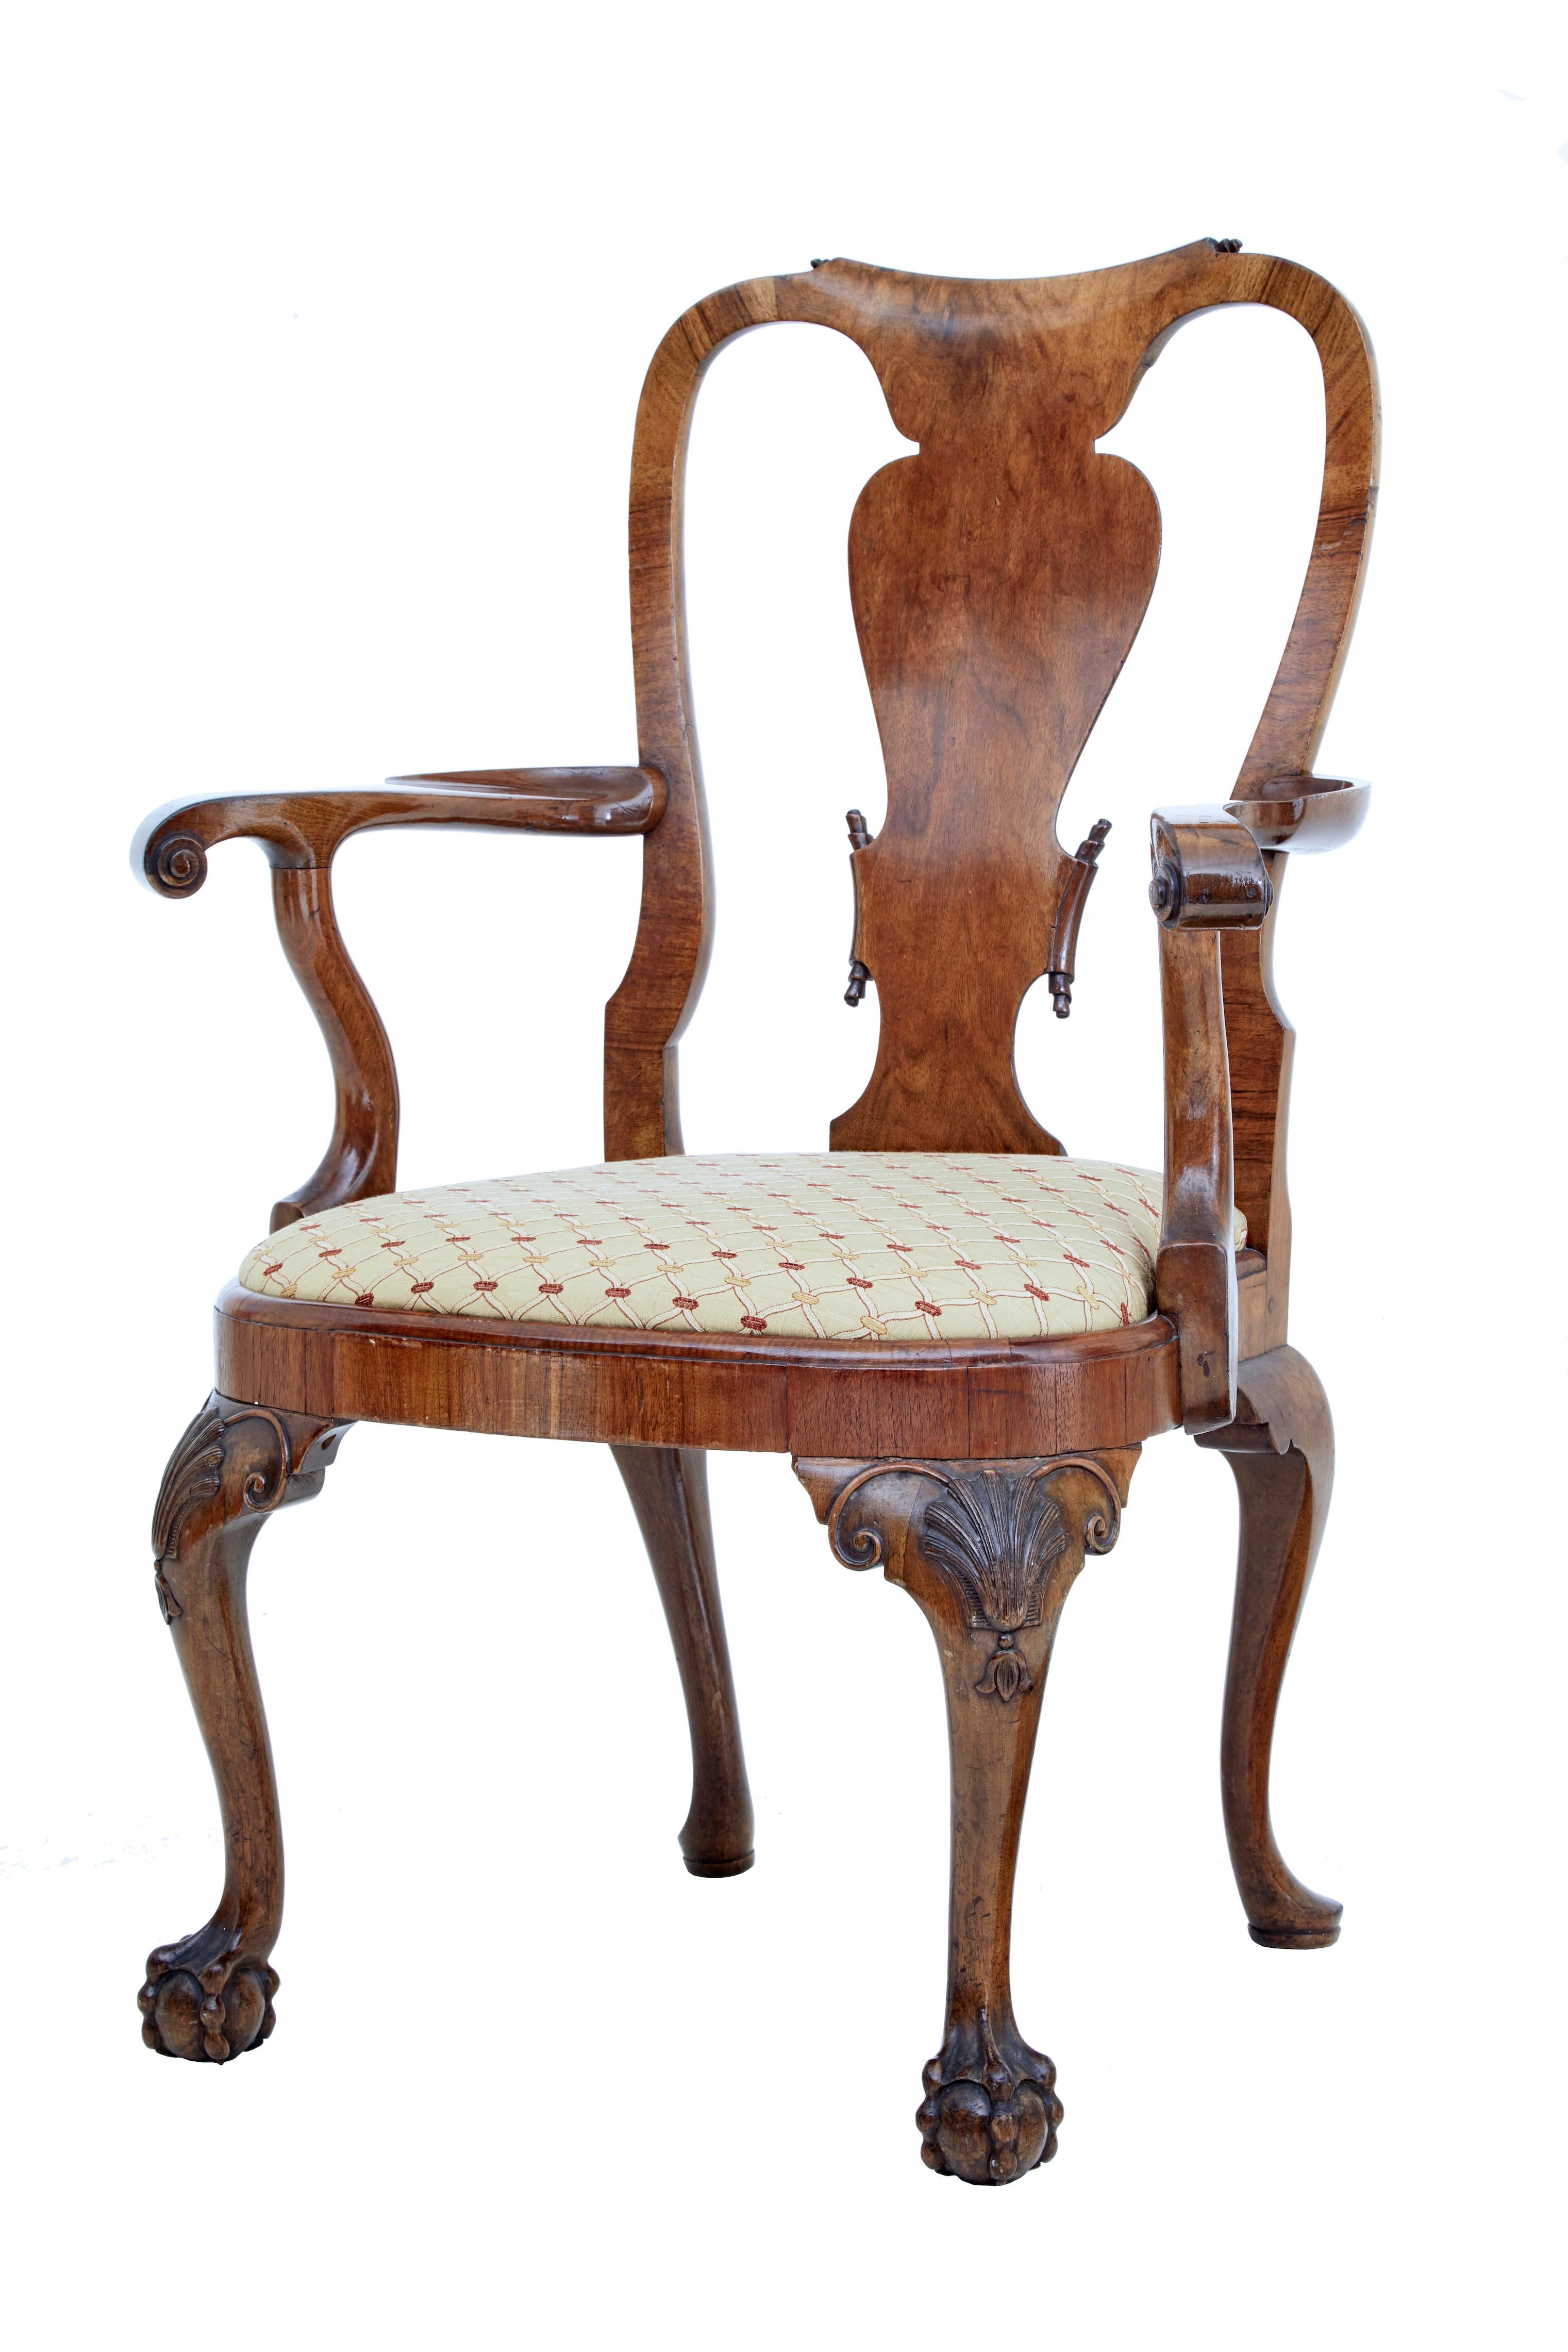 Set of 8 carved walnut dining chairs by spillman & co circa 1910.

Fine quality set of 8 walnut dining chairs by well known london retailer spillman & co of london.

All 8 chairs are carver/armchairs and they offer generous proportions around the